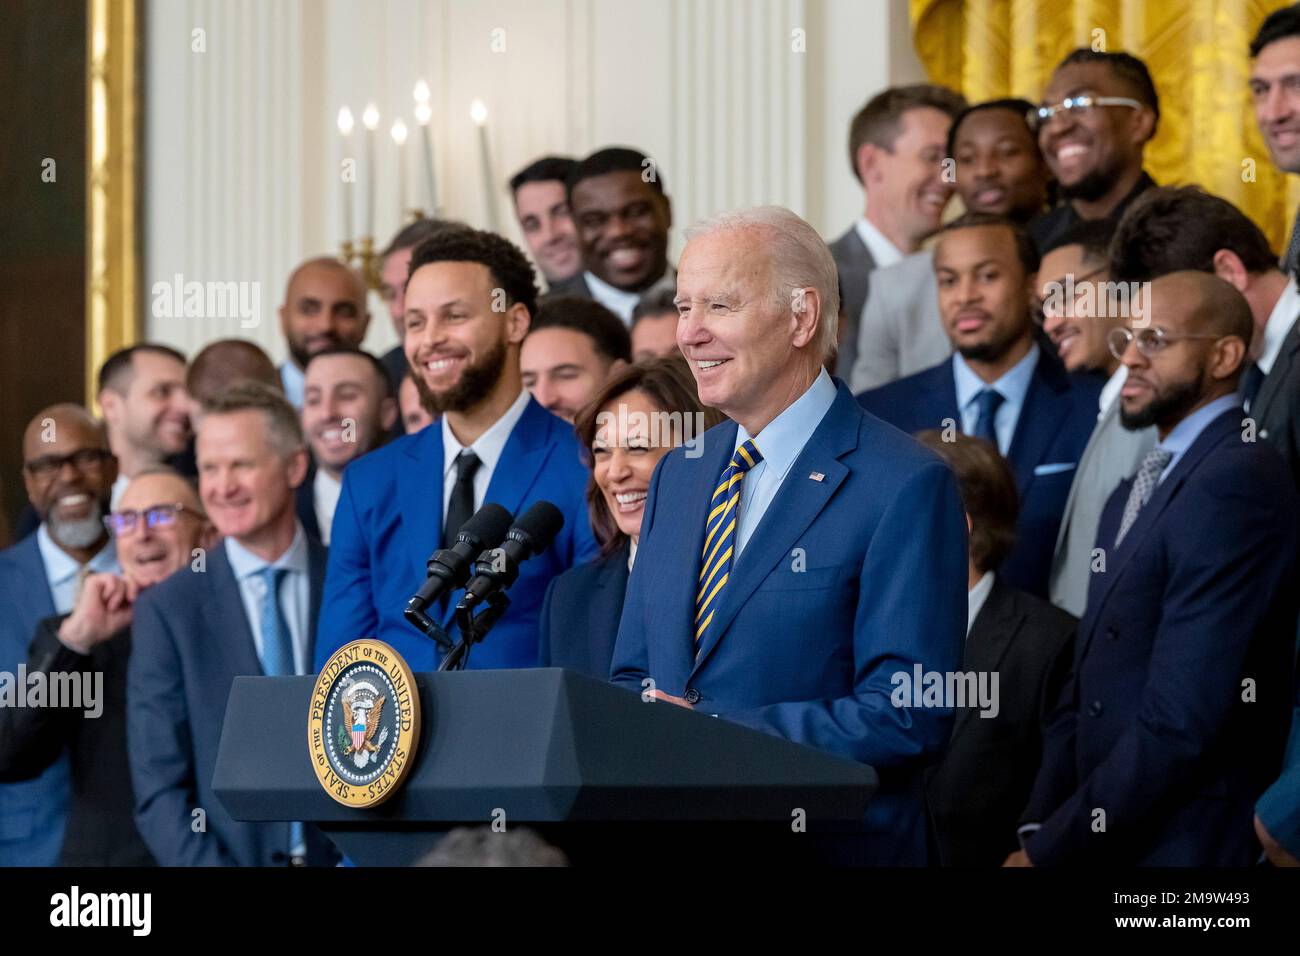 Washington, United States Of America. 17th Jan, 2023. Washington, United States of America. 17 January, 2023. U.S President Joe Biden, smiles as delivers remarks during a celebration of the Golden State Warriors 2022 NBA championship at the East Room of the White House, January 17, 2023 in Washington, DC Credit: Erin Scott/White House Photo/Alamy Live News Stock Photo